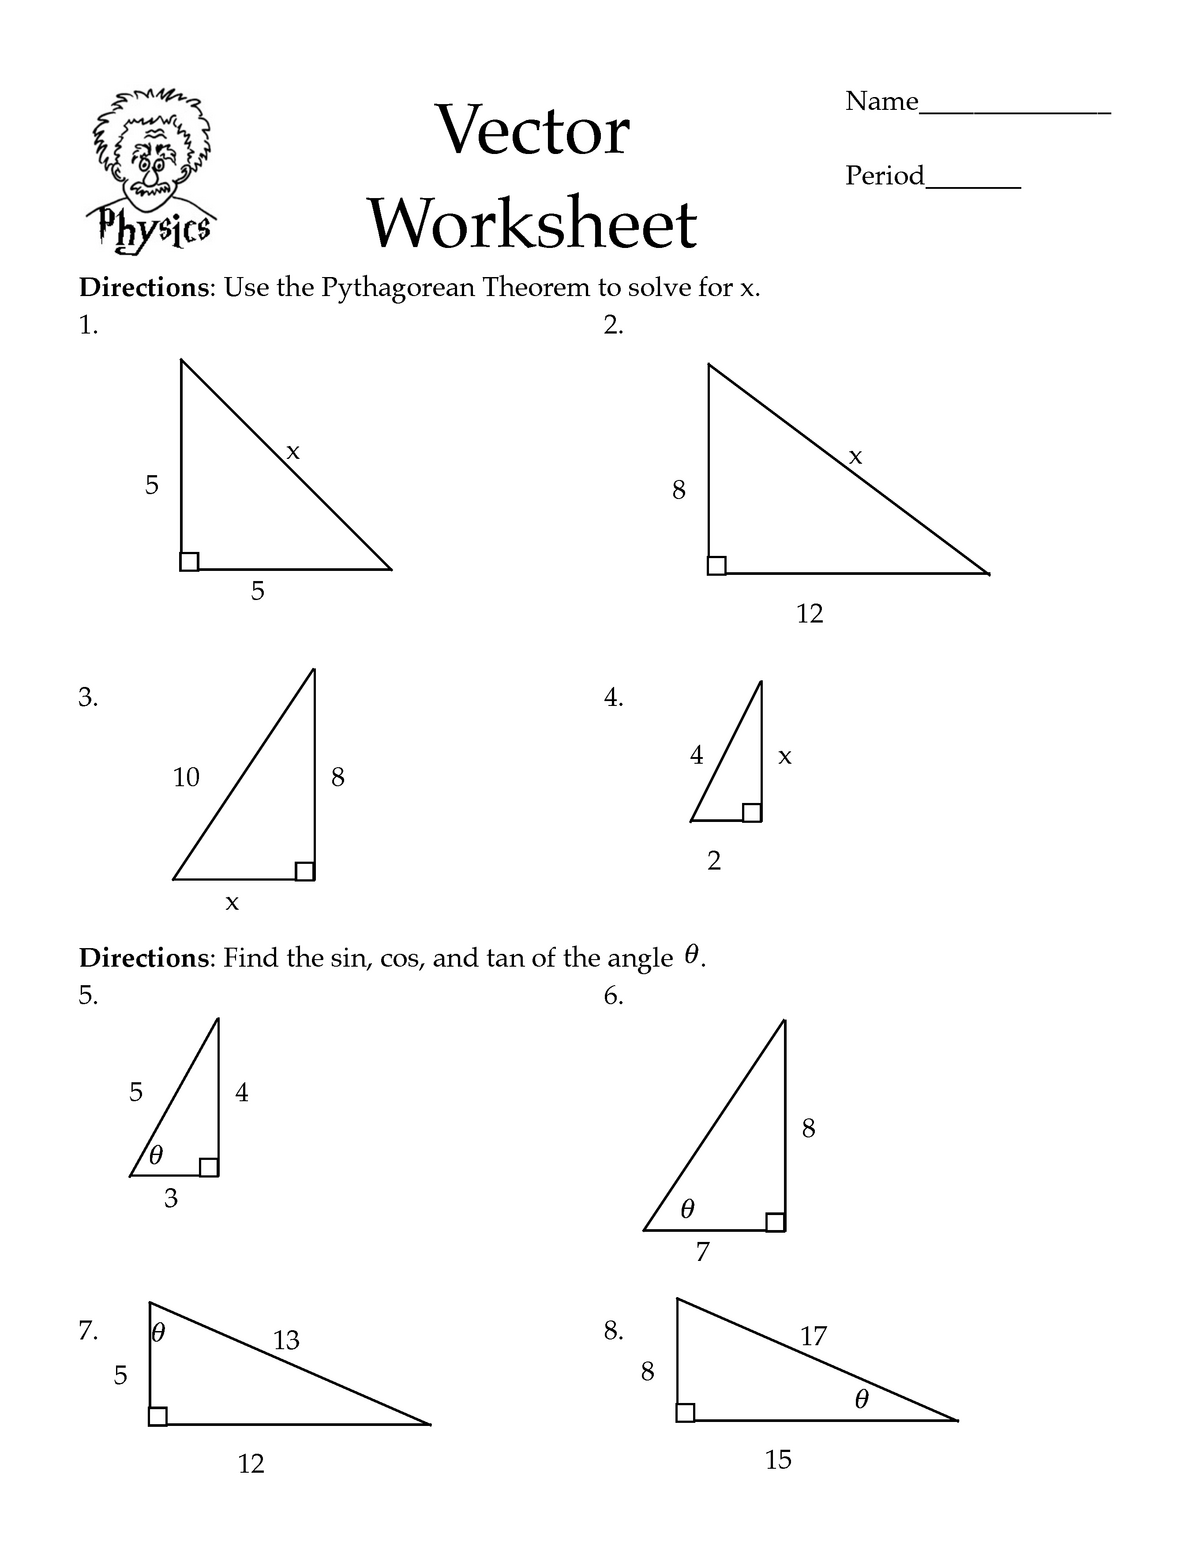 20 20 Vector Worksheet pdf - Vector Directions : Use the Regarding Pythagorean Theorem Worksheet Answers